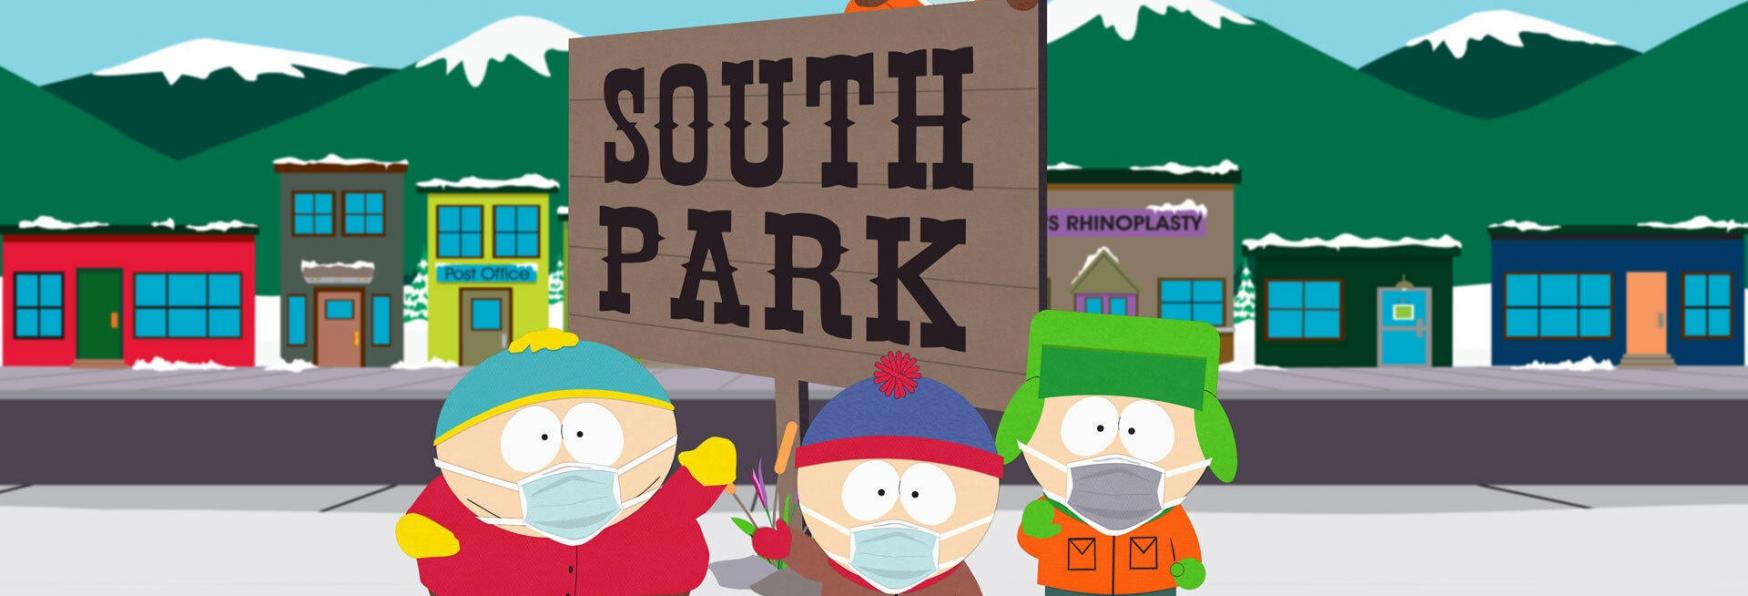 South Park 25: Announced the Debut Date of the new Season